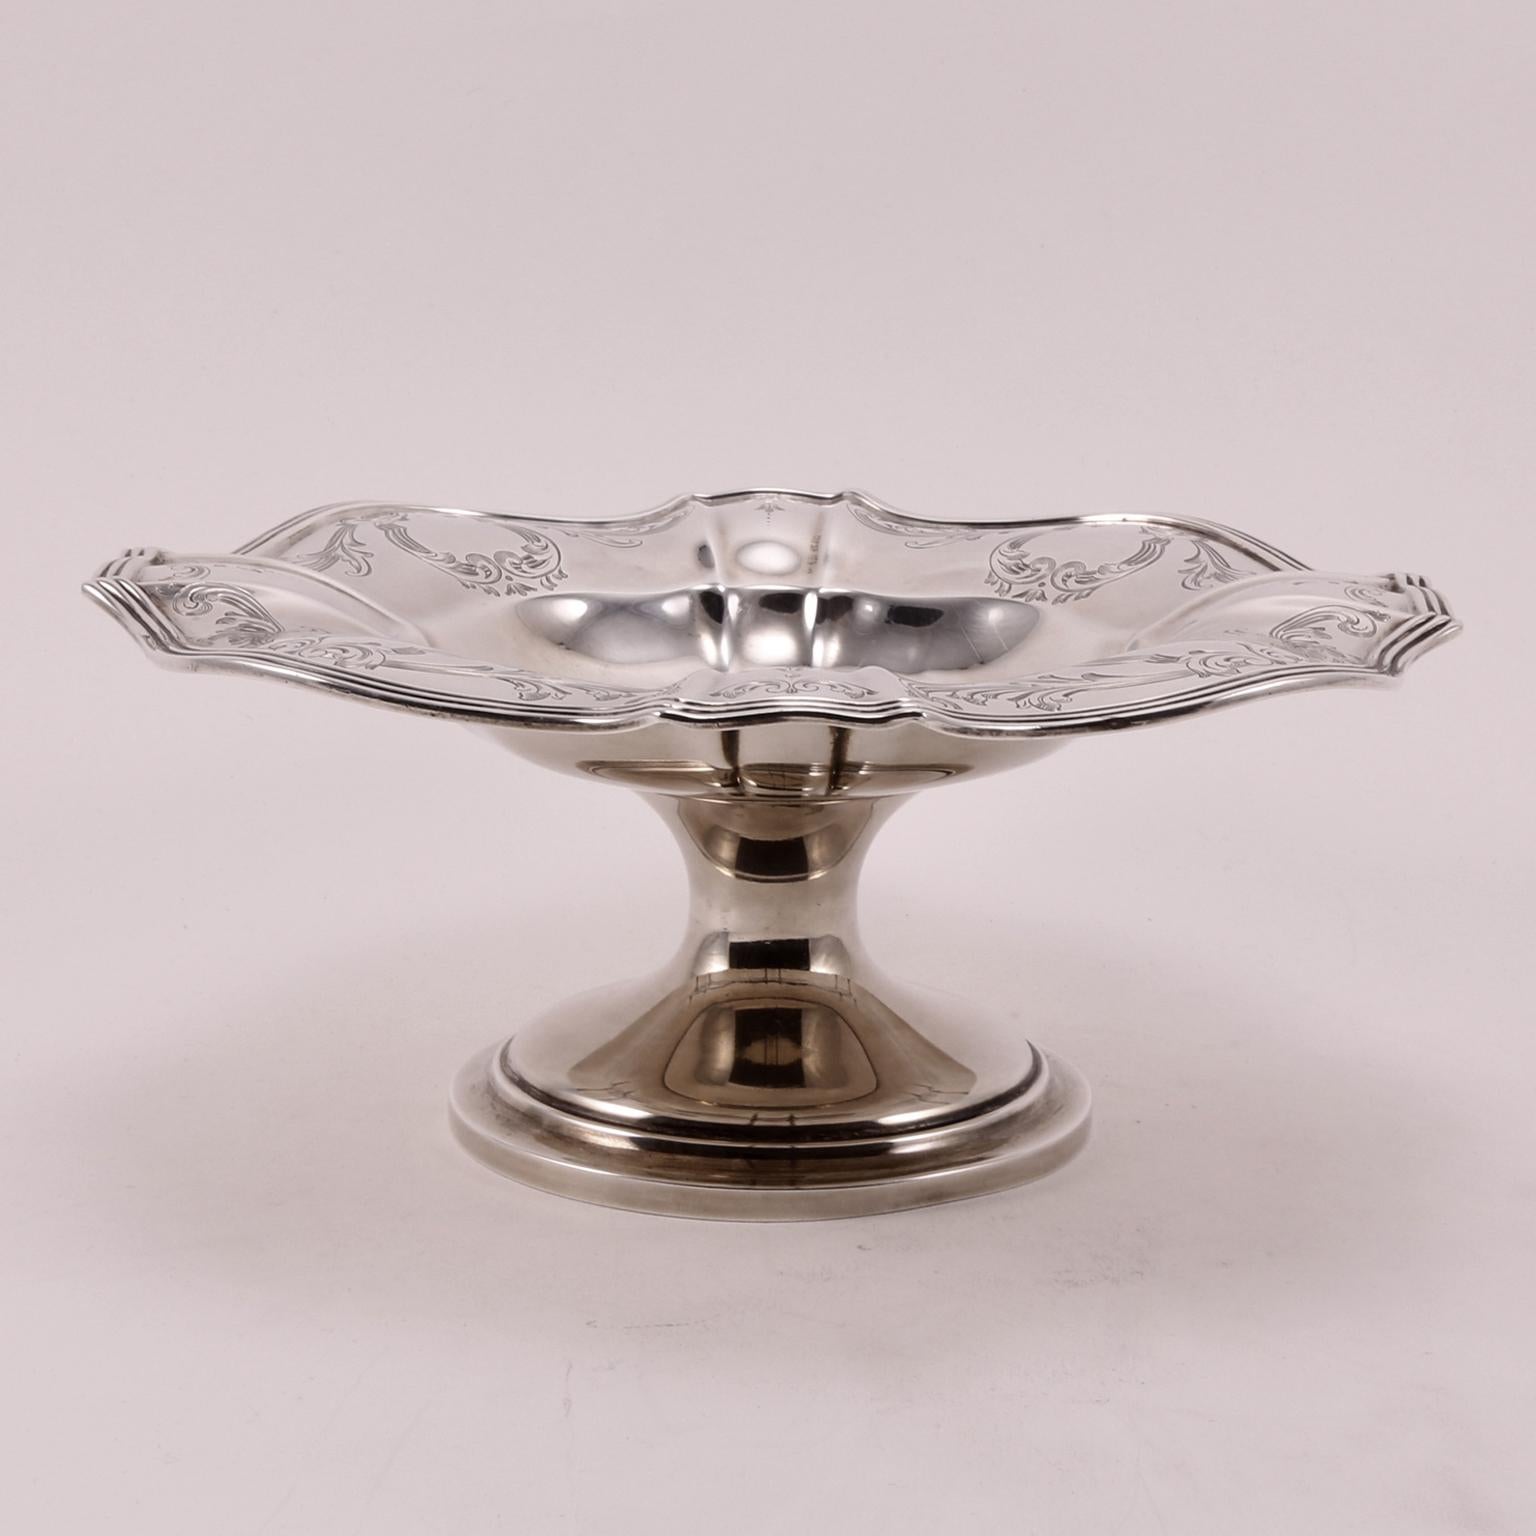 Early 20th Century 19th Century Art Nouveau Sterling Silver Gorham Floral Centerpiece For Sale